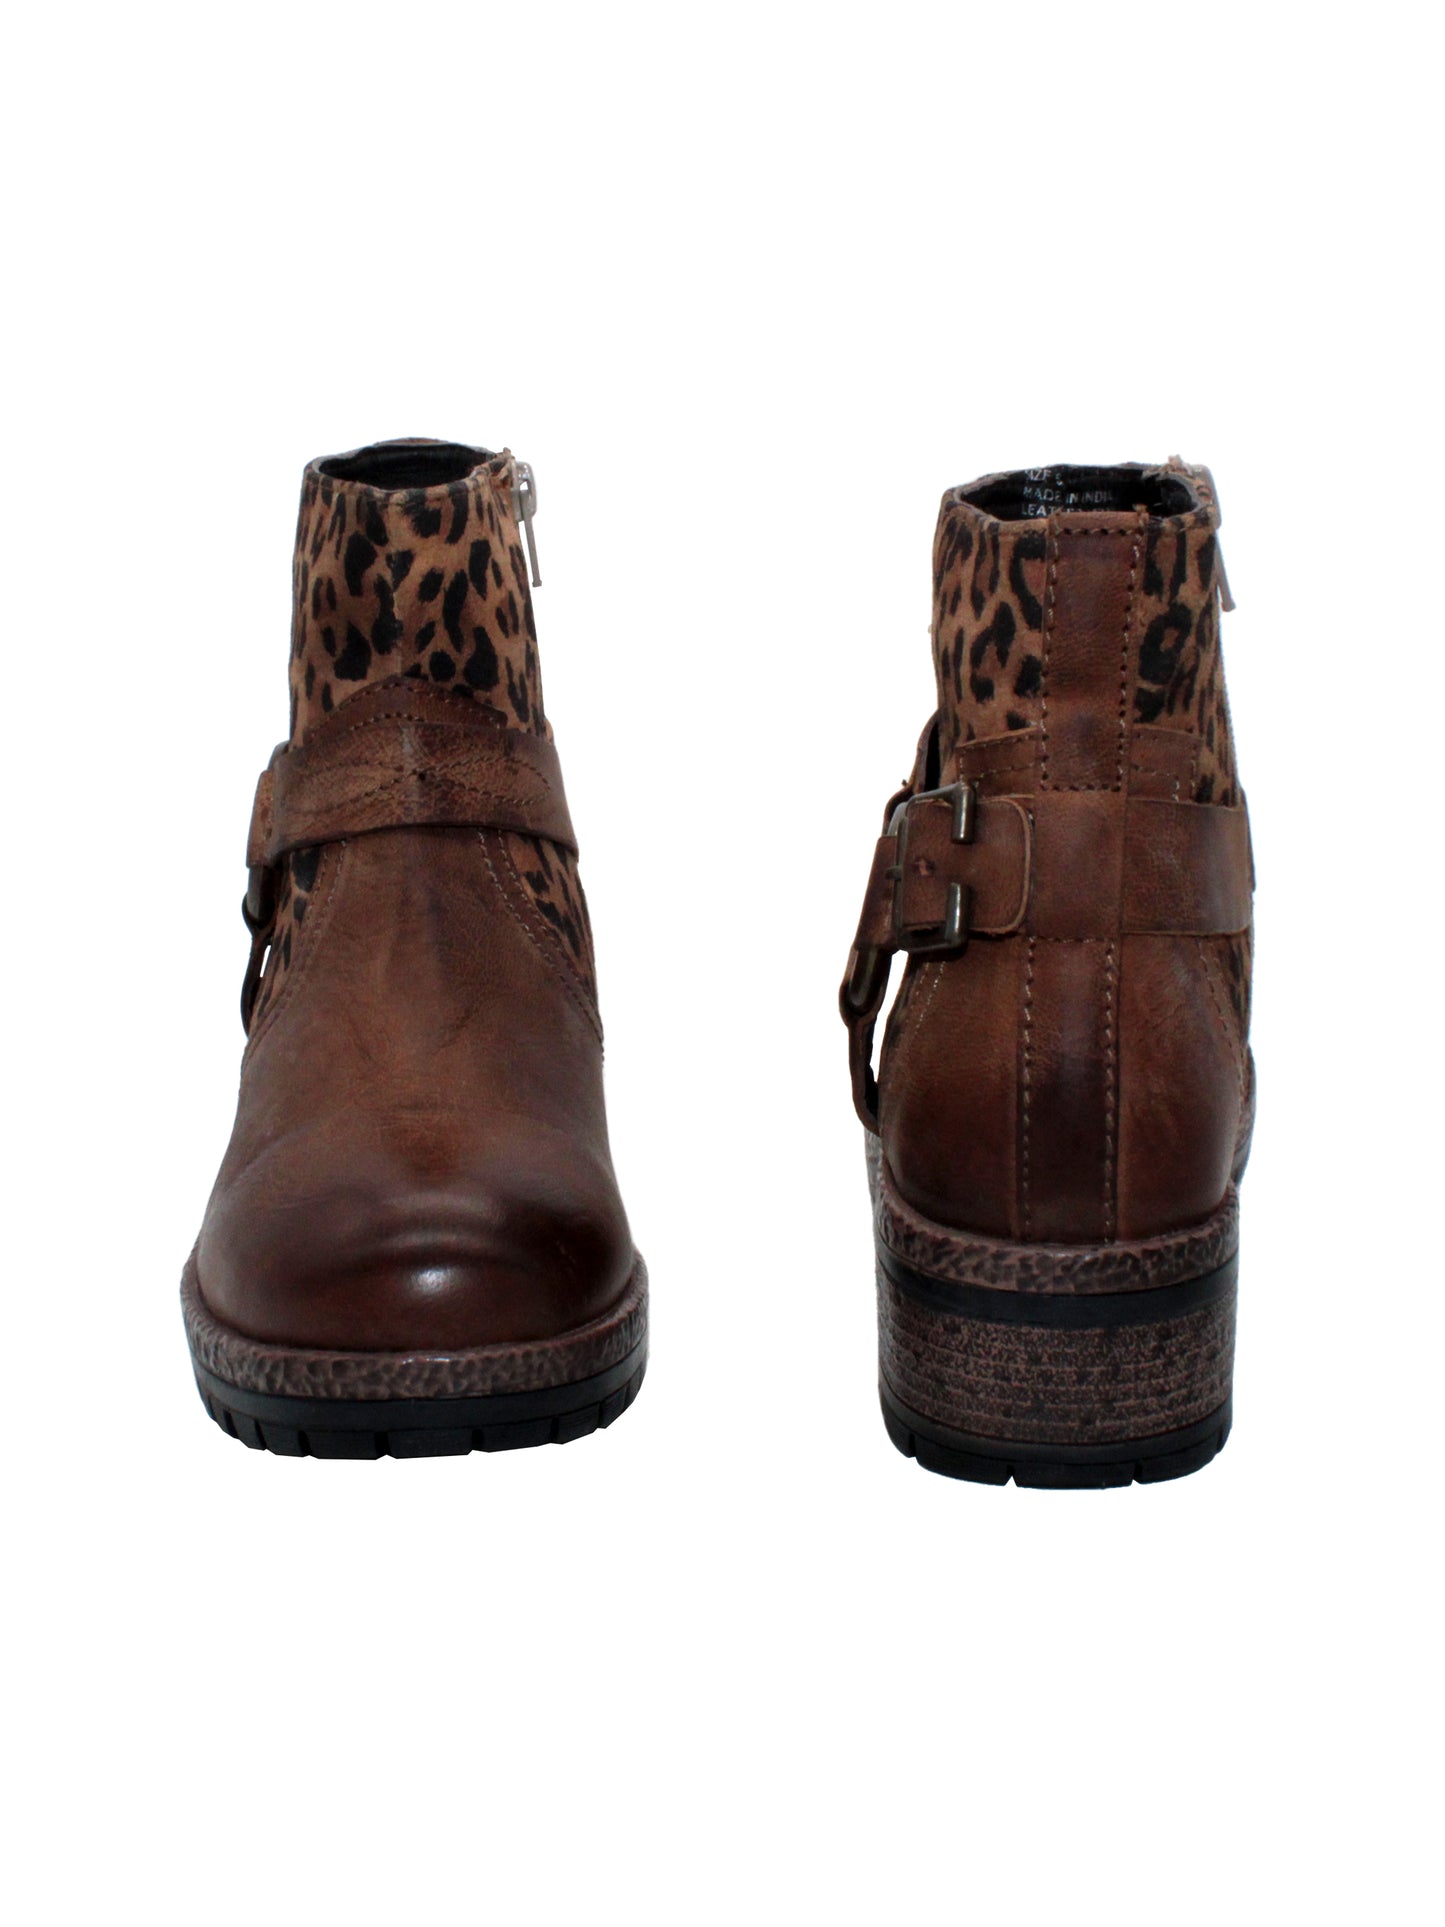 Leather and microfiber leopard printed upper Harness detail with metal buckle and O rings Internal nylon zipper Easy on and off moto bootie style Padded insole Approx. 4.75” shaft height Approx. 1.75" heel height Rubber lug bottom outsole front and back